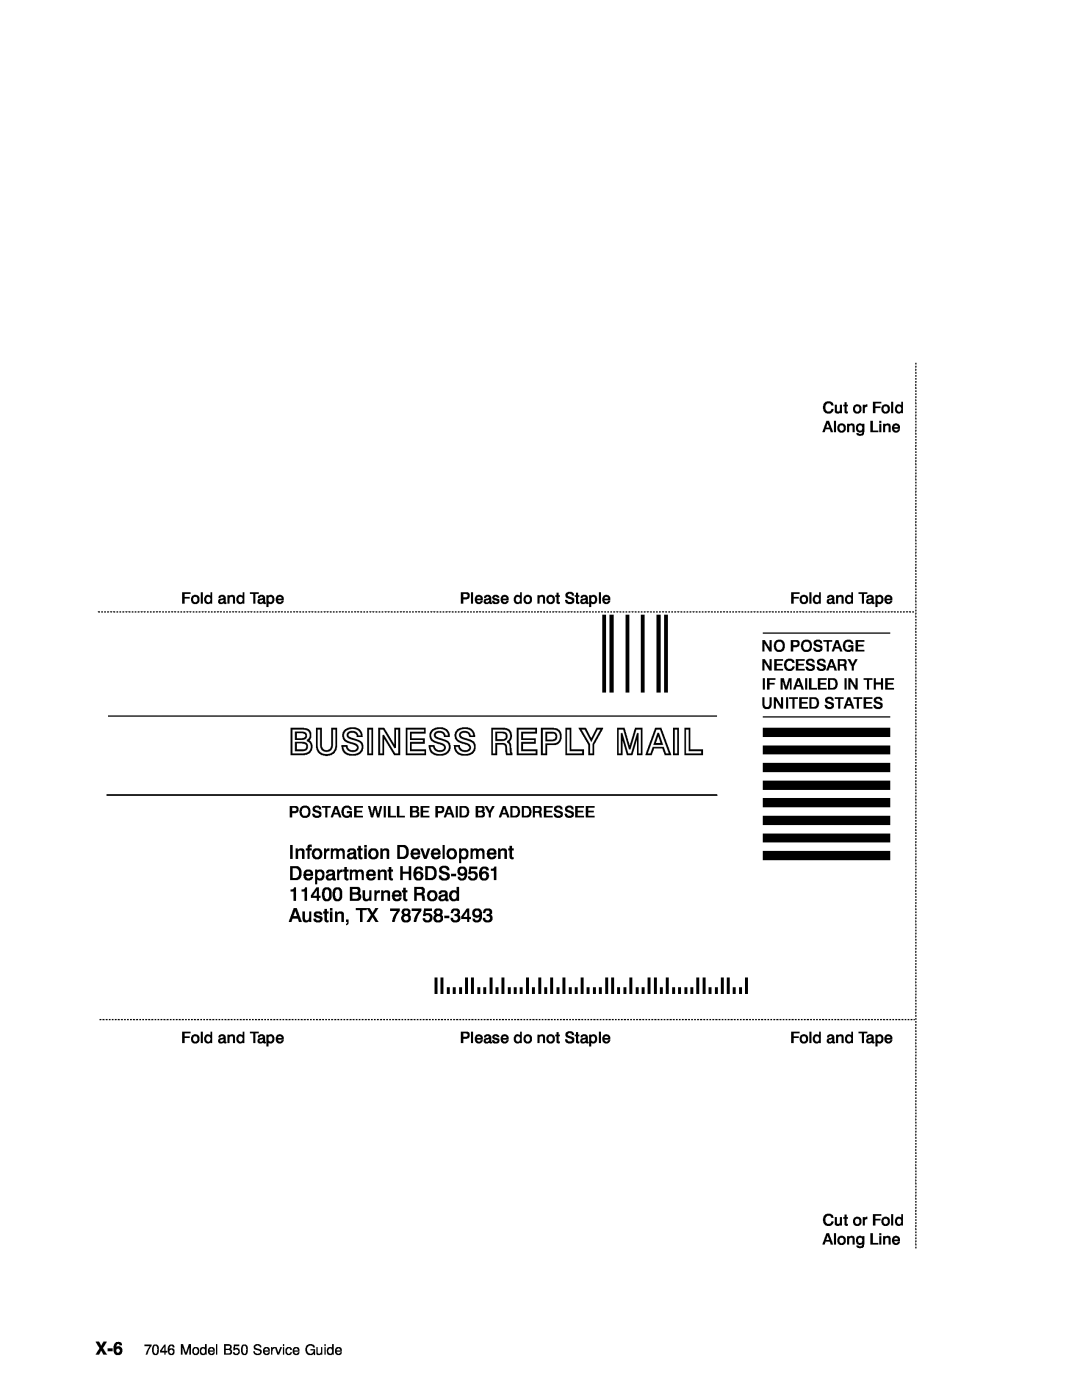 IBM B50 Business Reply Mail, Information Development Department H6DS-9561 11400 Burnet Road, Austin, TX, Fold and Tape 